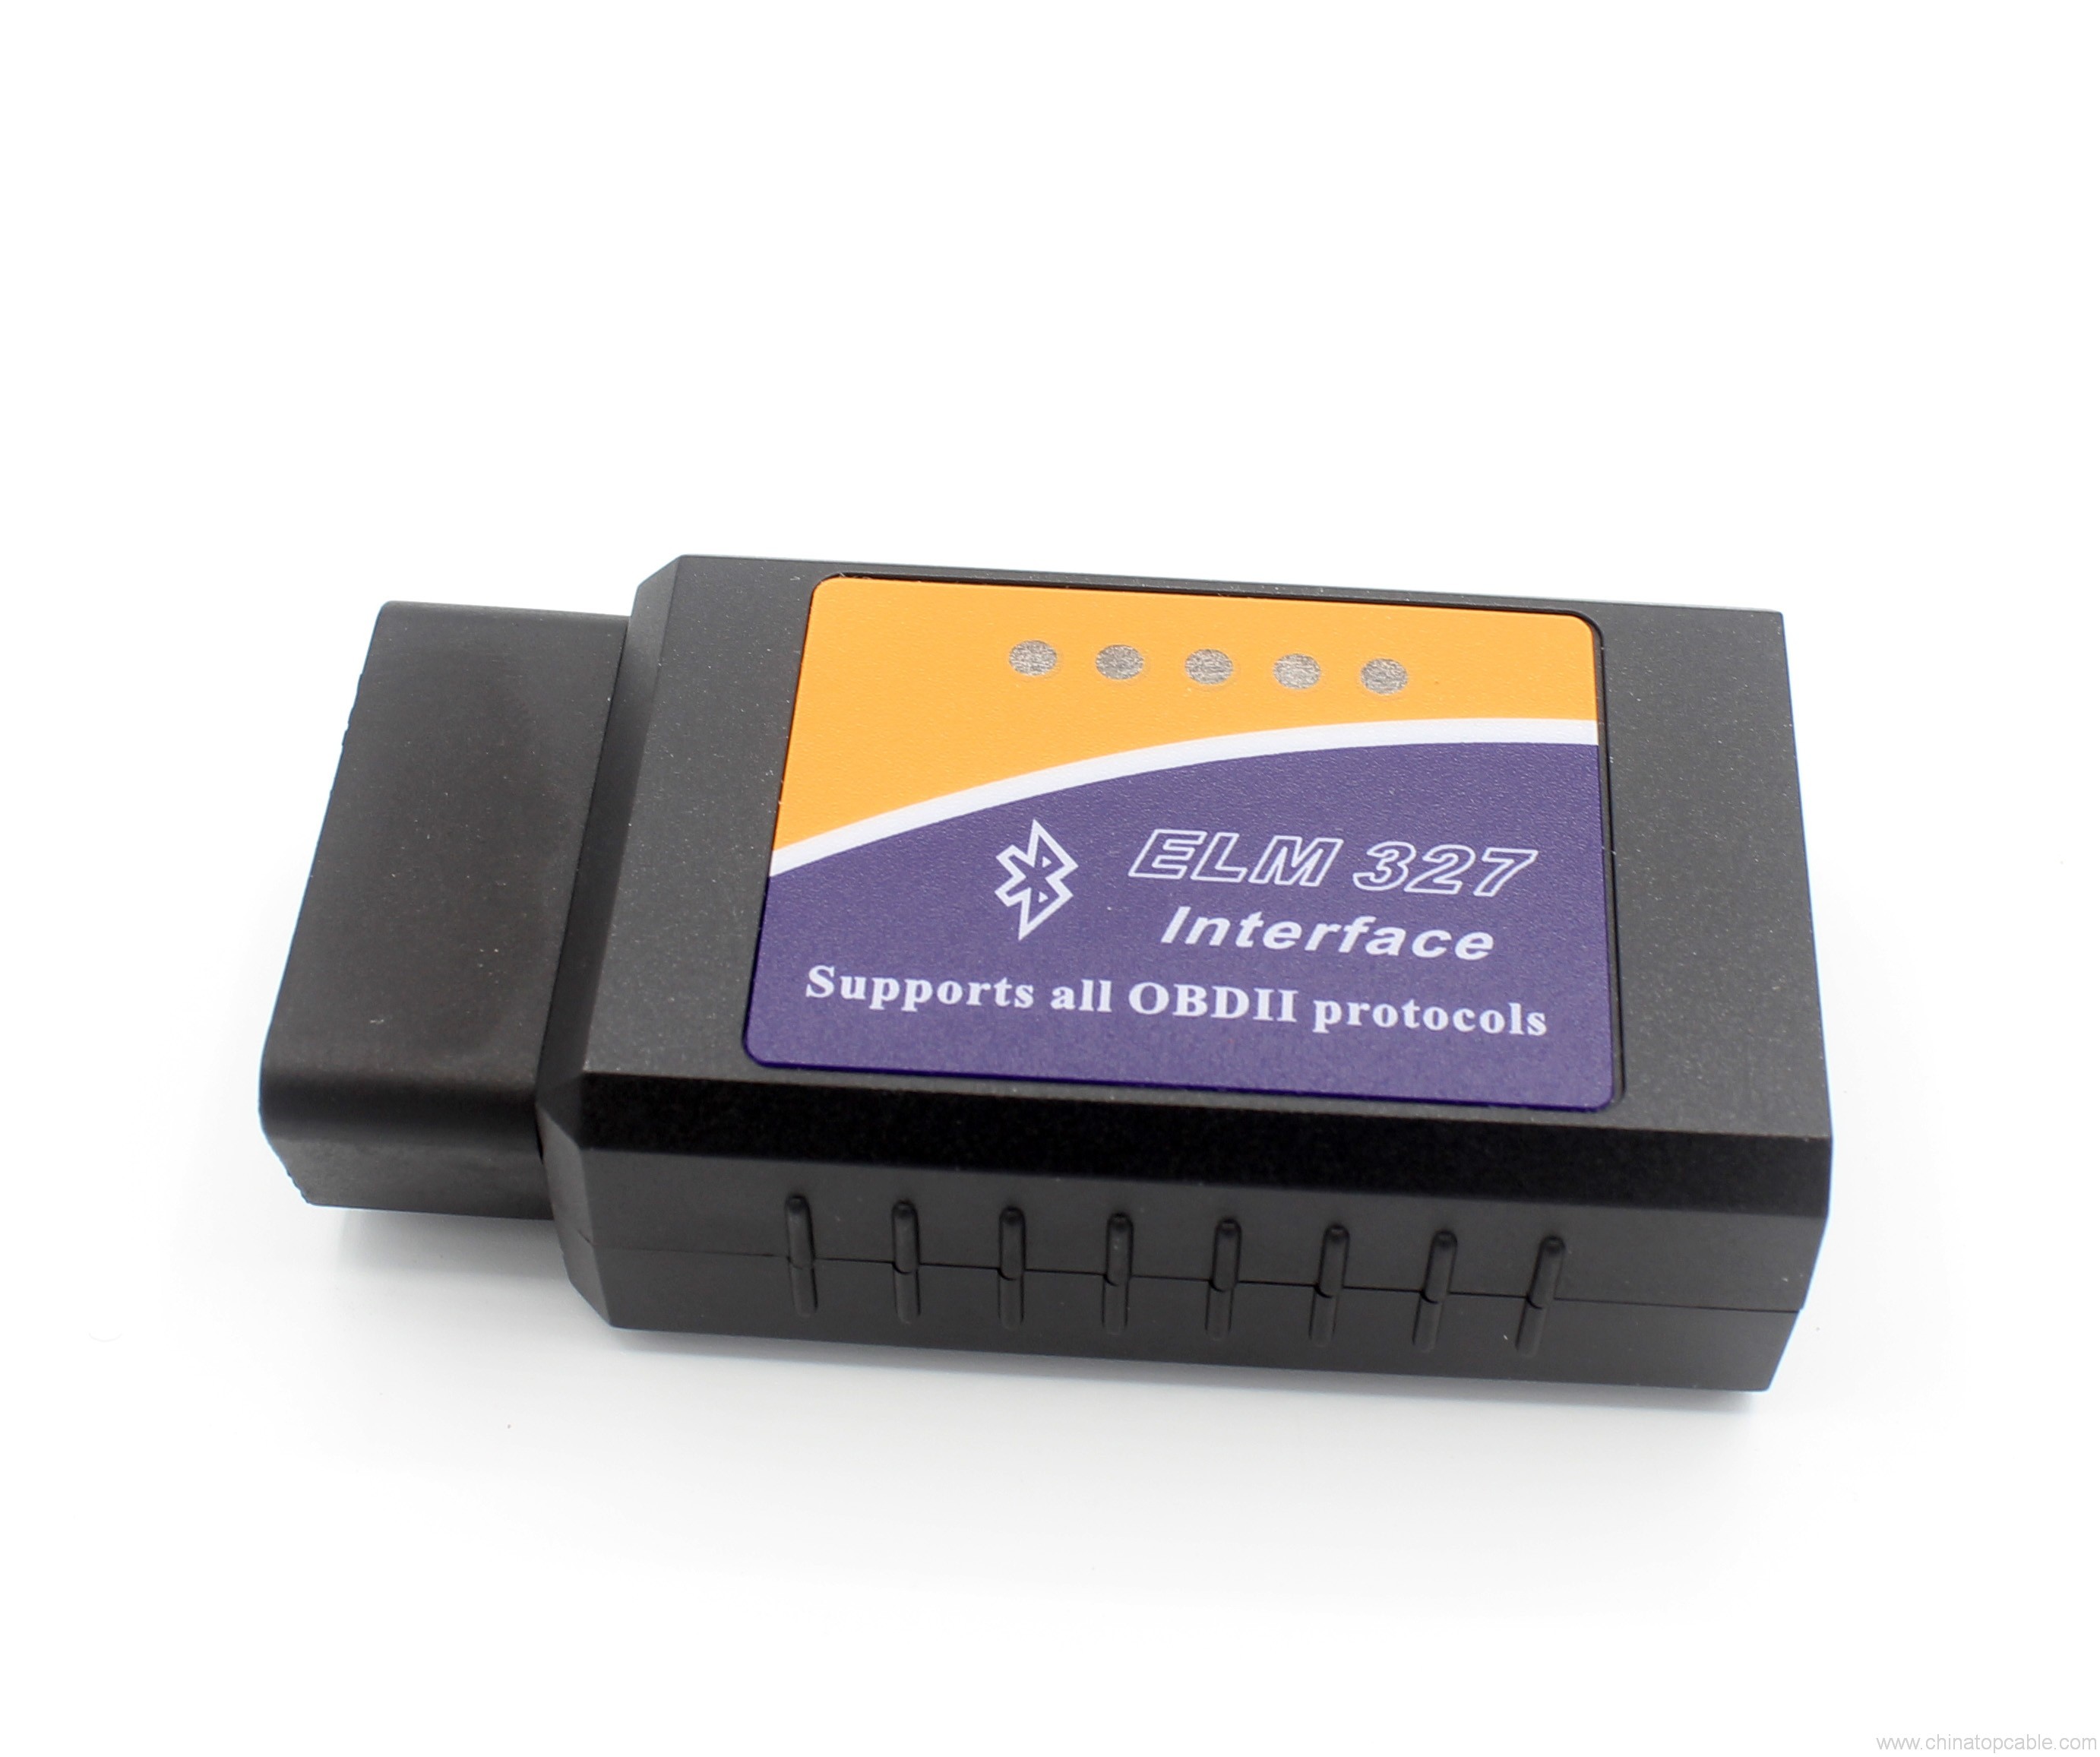 Interface supports all protocols. Elm 327 interface obd2. Elm 327 2.1 Bluetooth. Elm327 interface supports all obd2. Obd2 сканер interface supports.